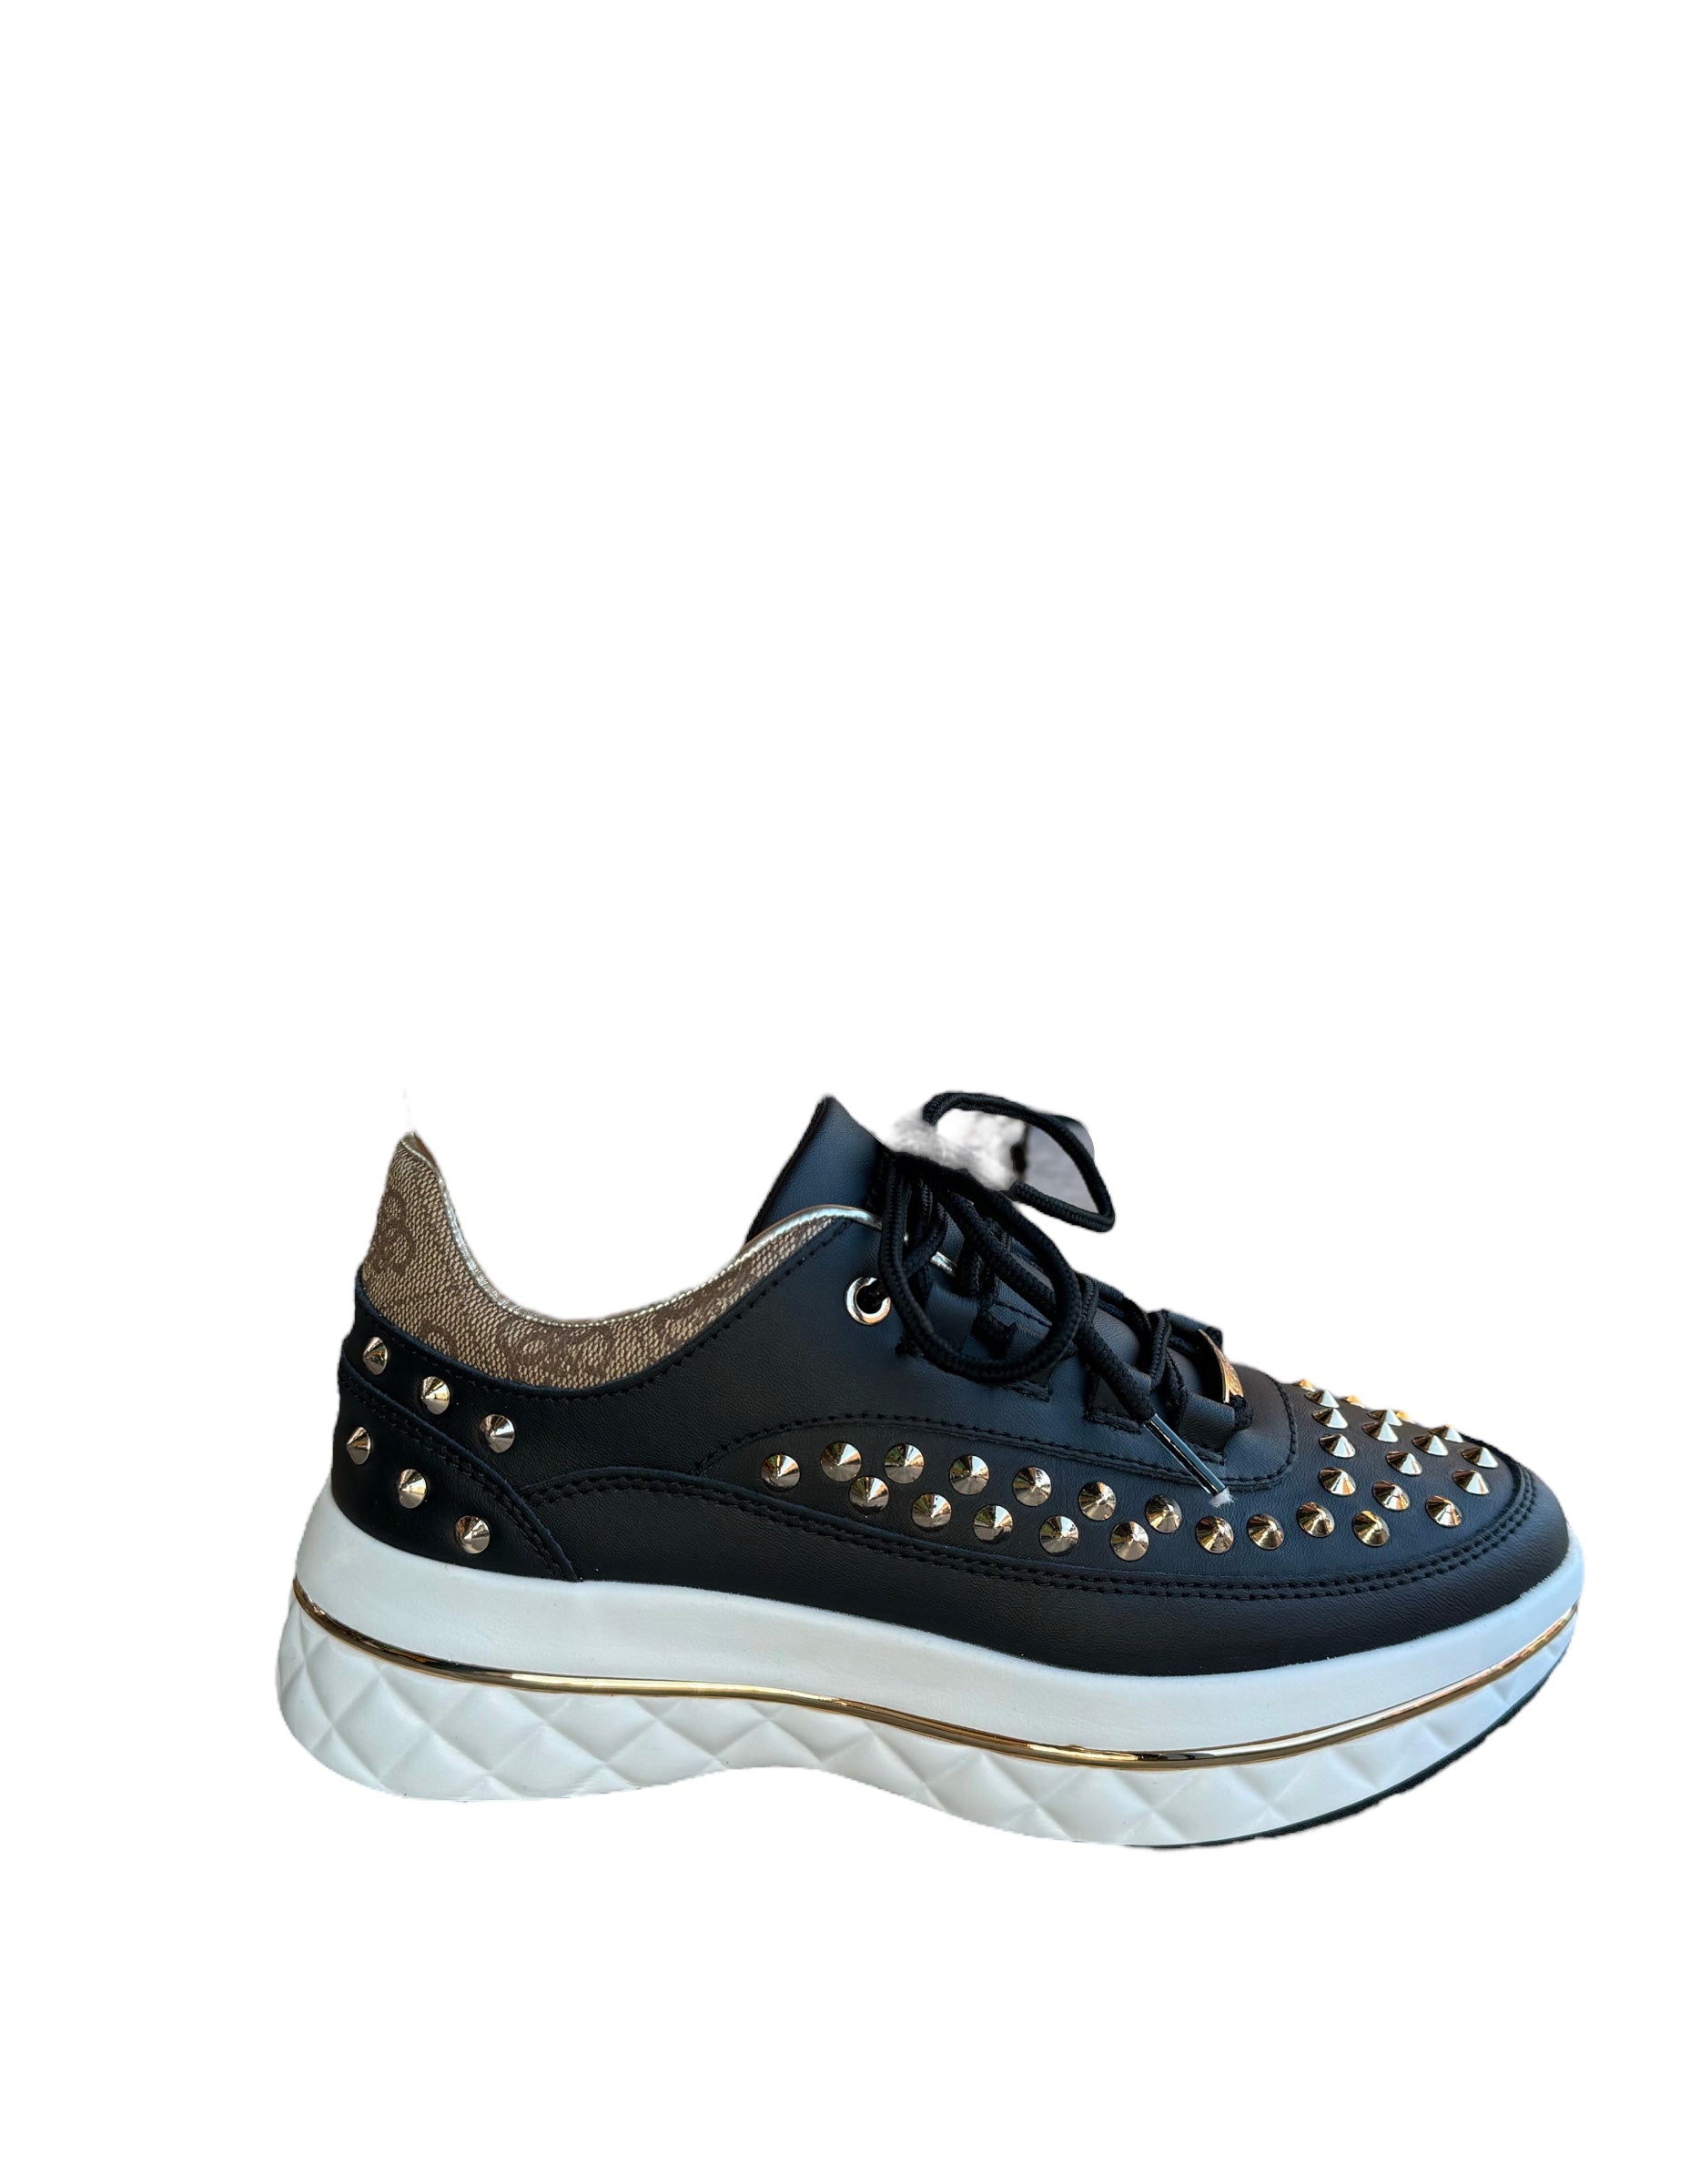 GUESS Gold Studded Lace Up Trainer Black